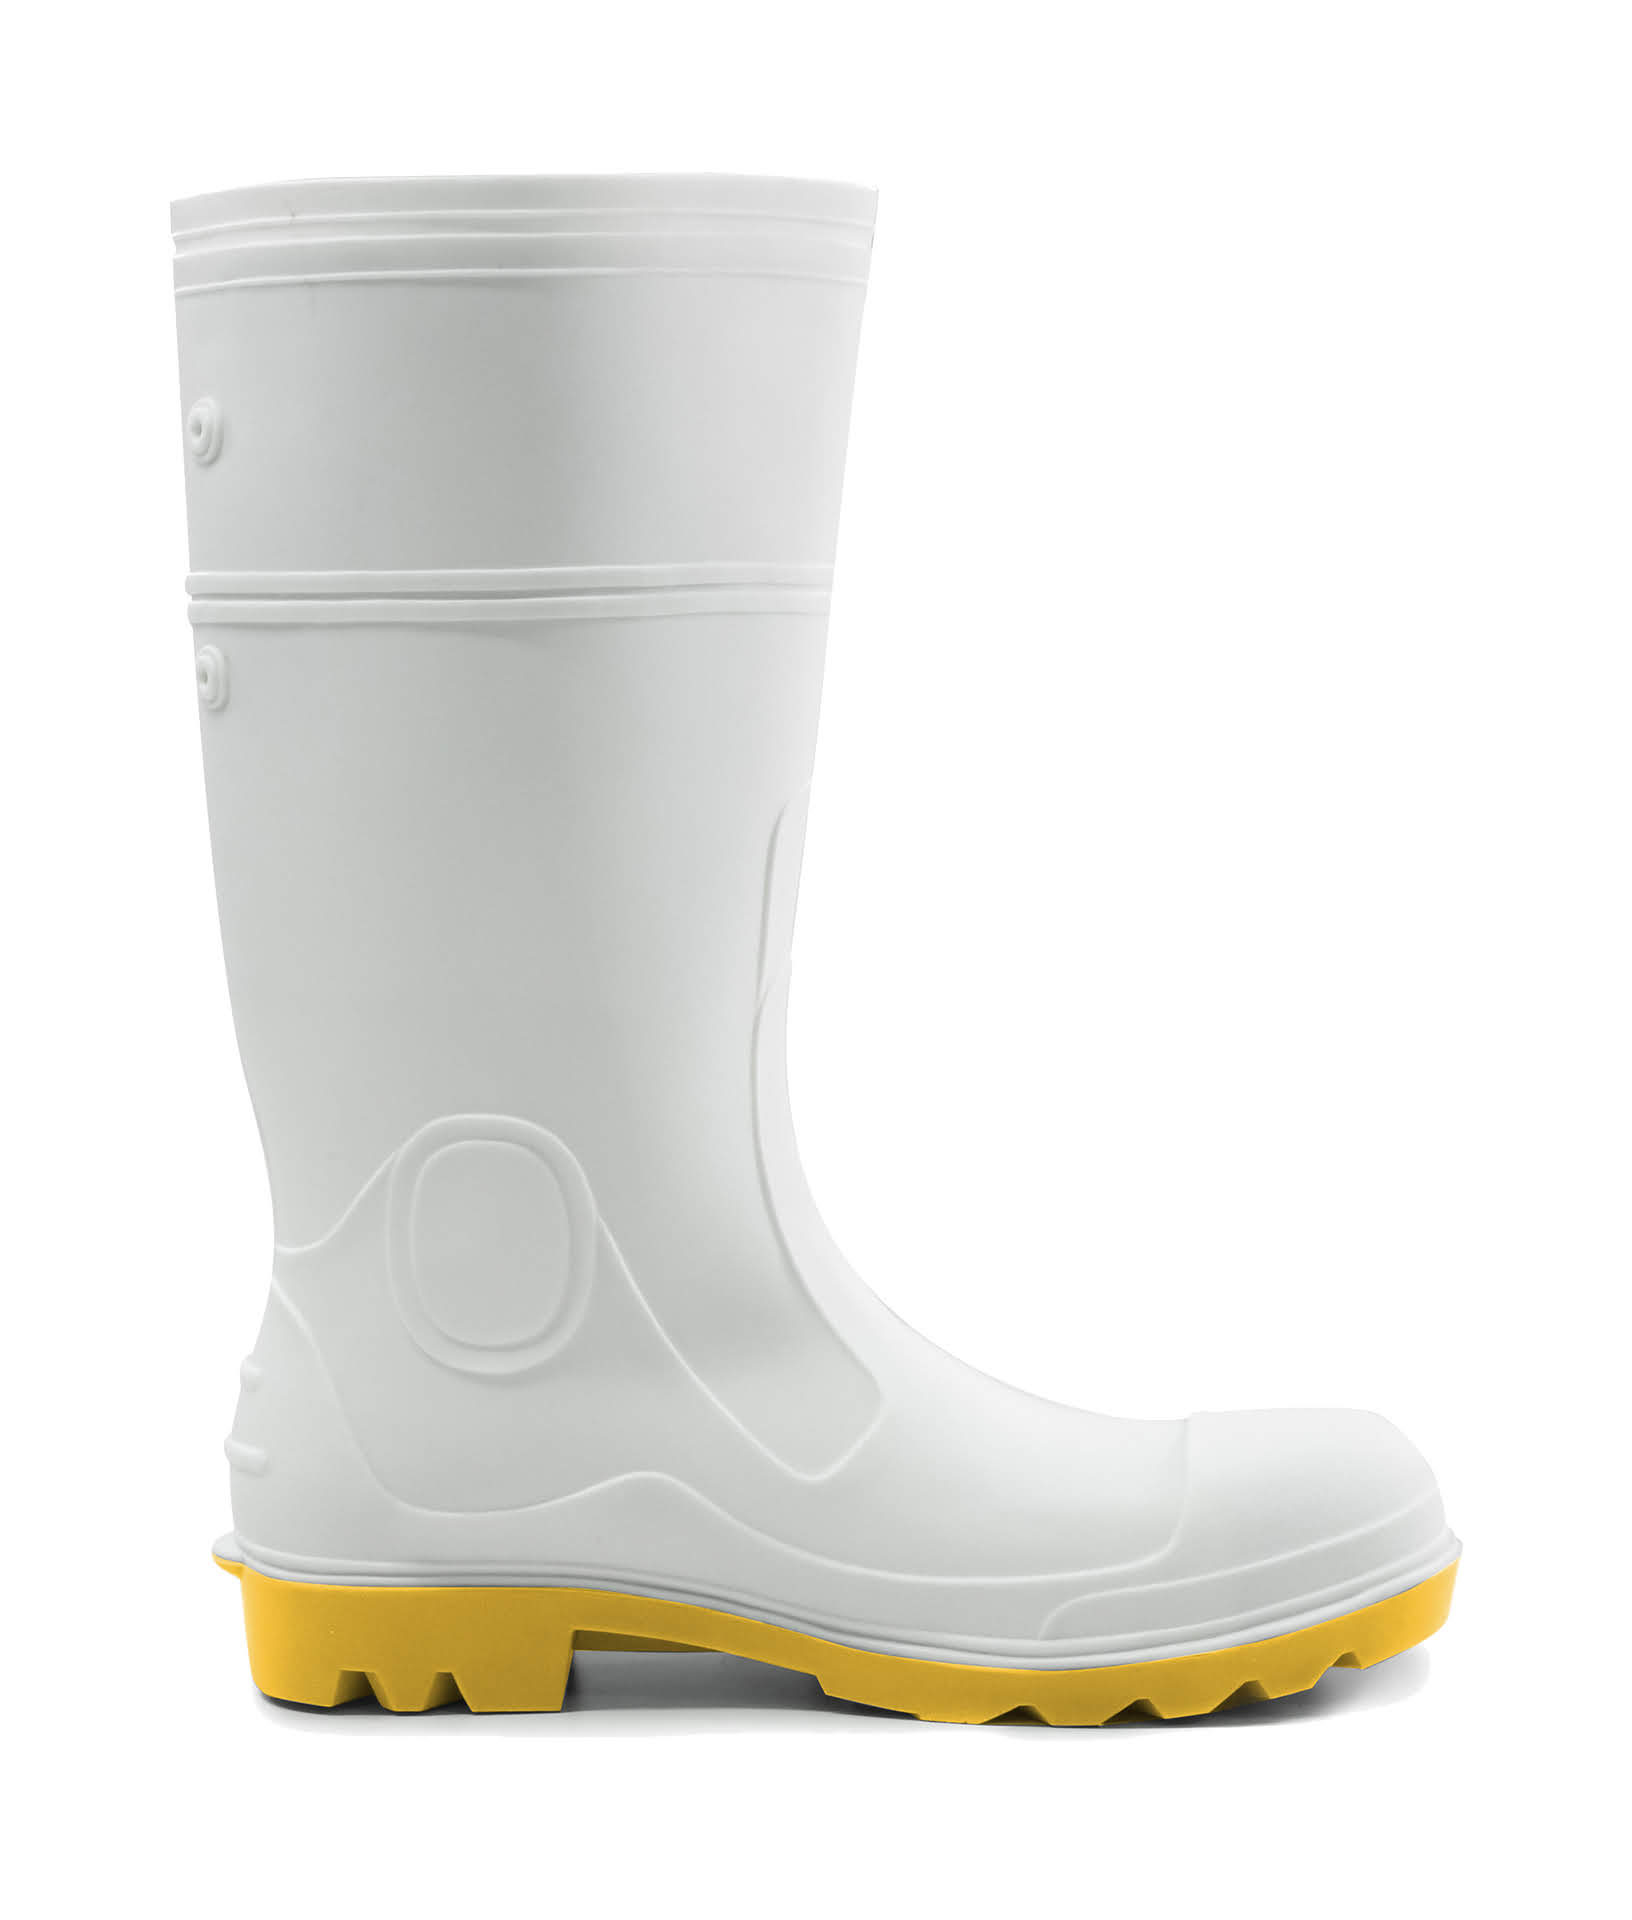 Mohawk PVC/Nitrile Food Industry Gumboot White/Yellow (MOHAWKGSX)